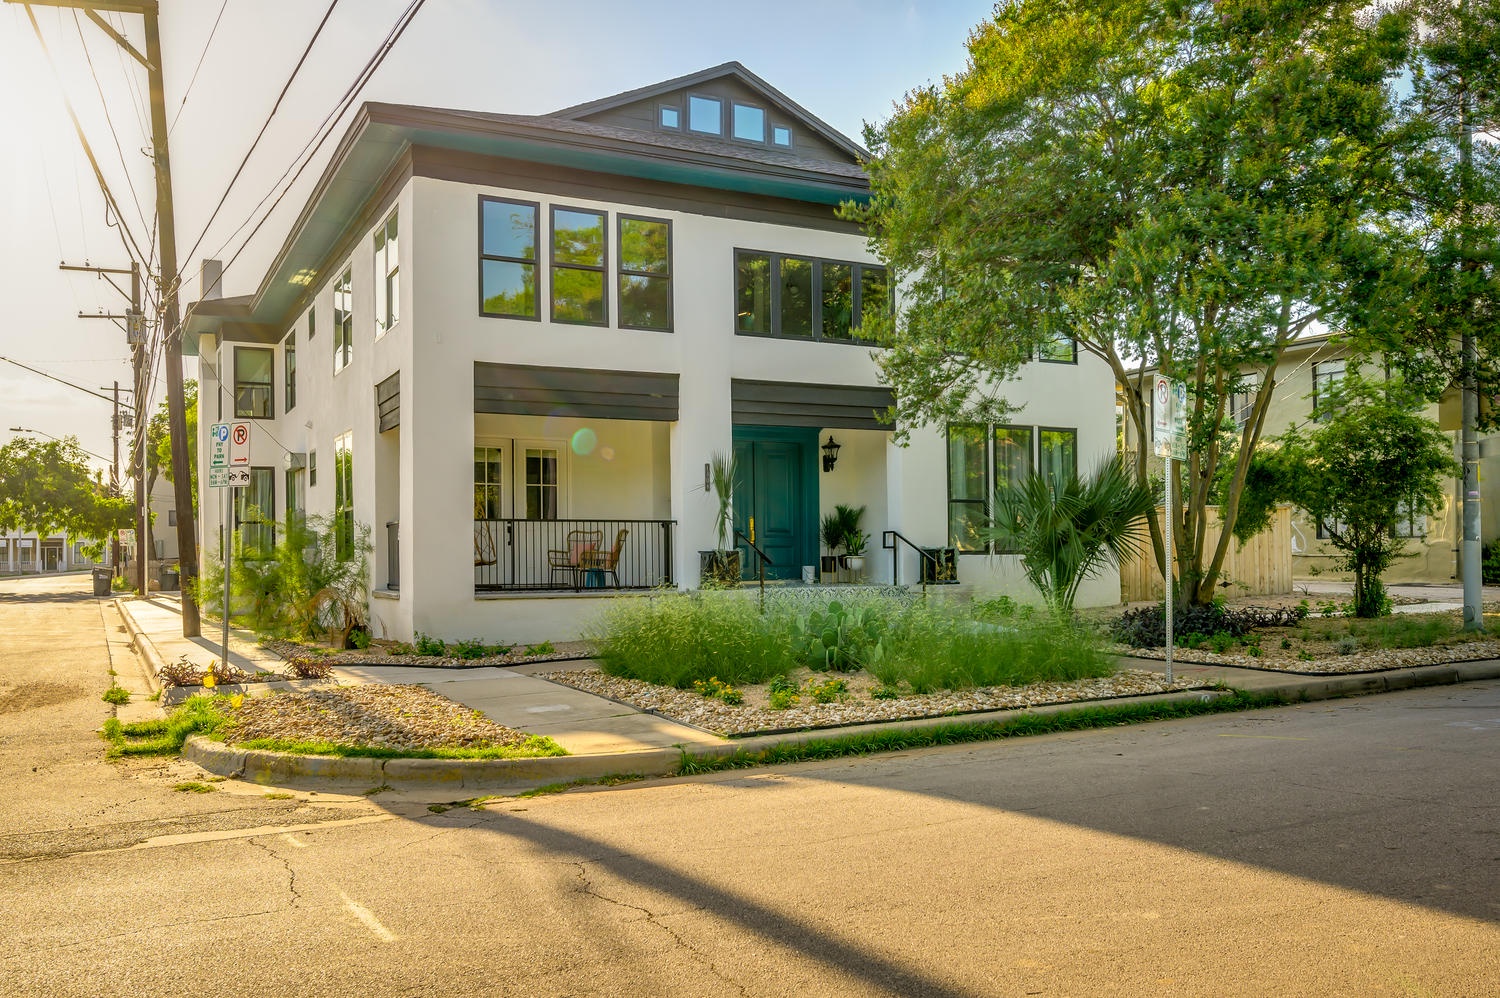 Welcome to Adina, a truly one-of-a-kind Bed & Breakfast in Austin’s historic Downtown